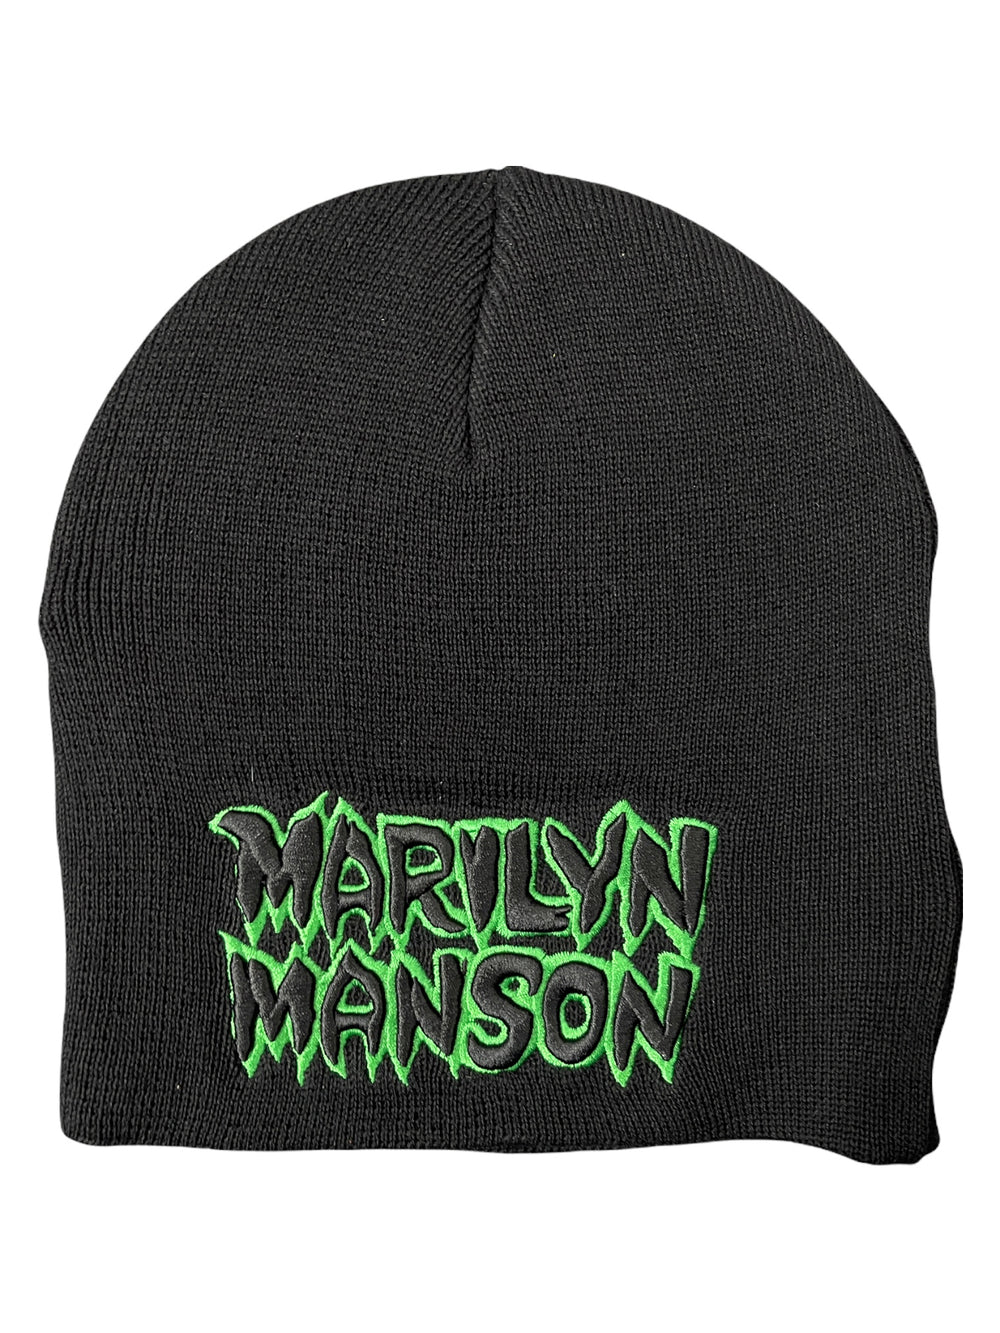 Marilyn Manson Raised Logo Embroidery Official Beanie Hat One Size Fits All NEW